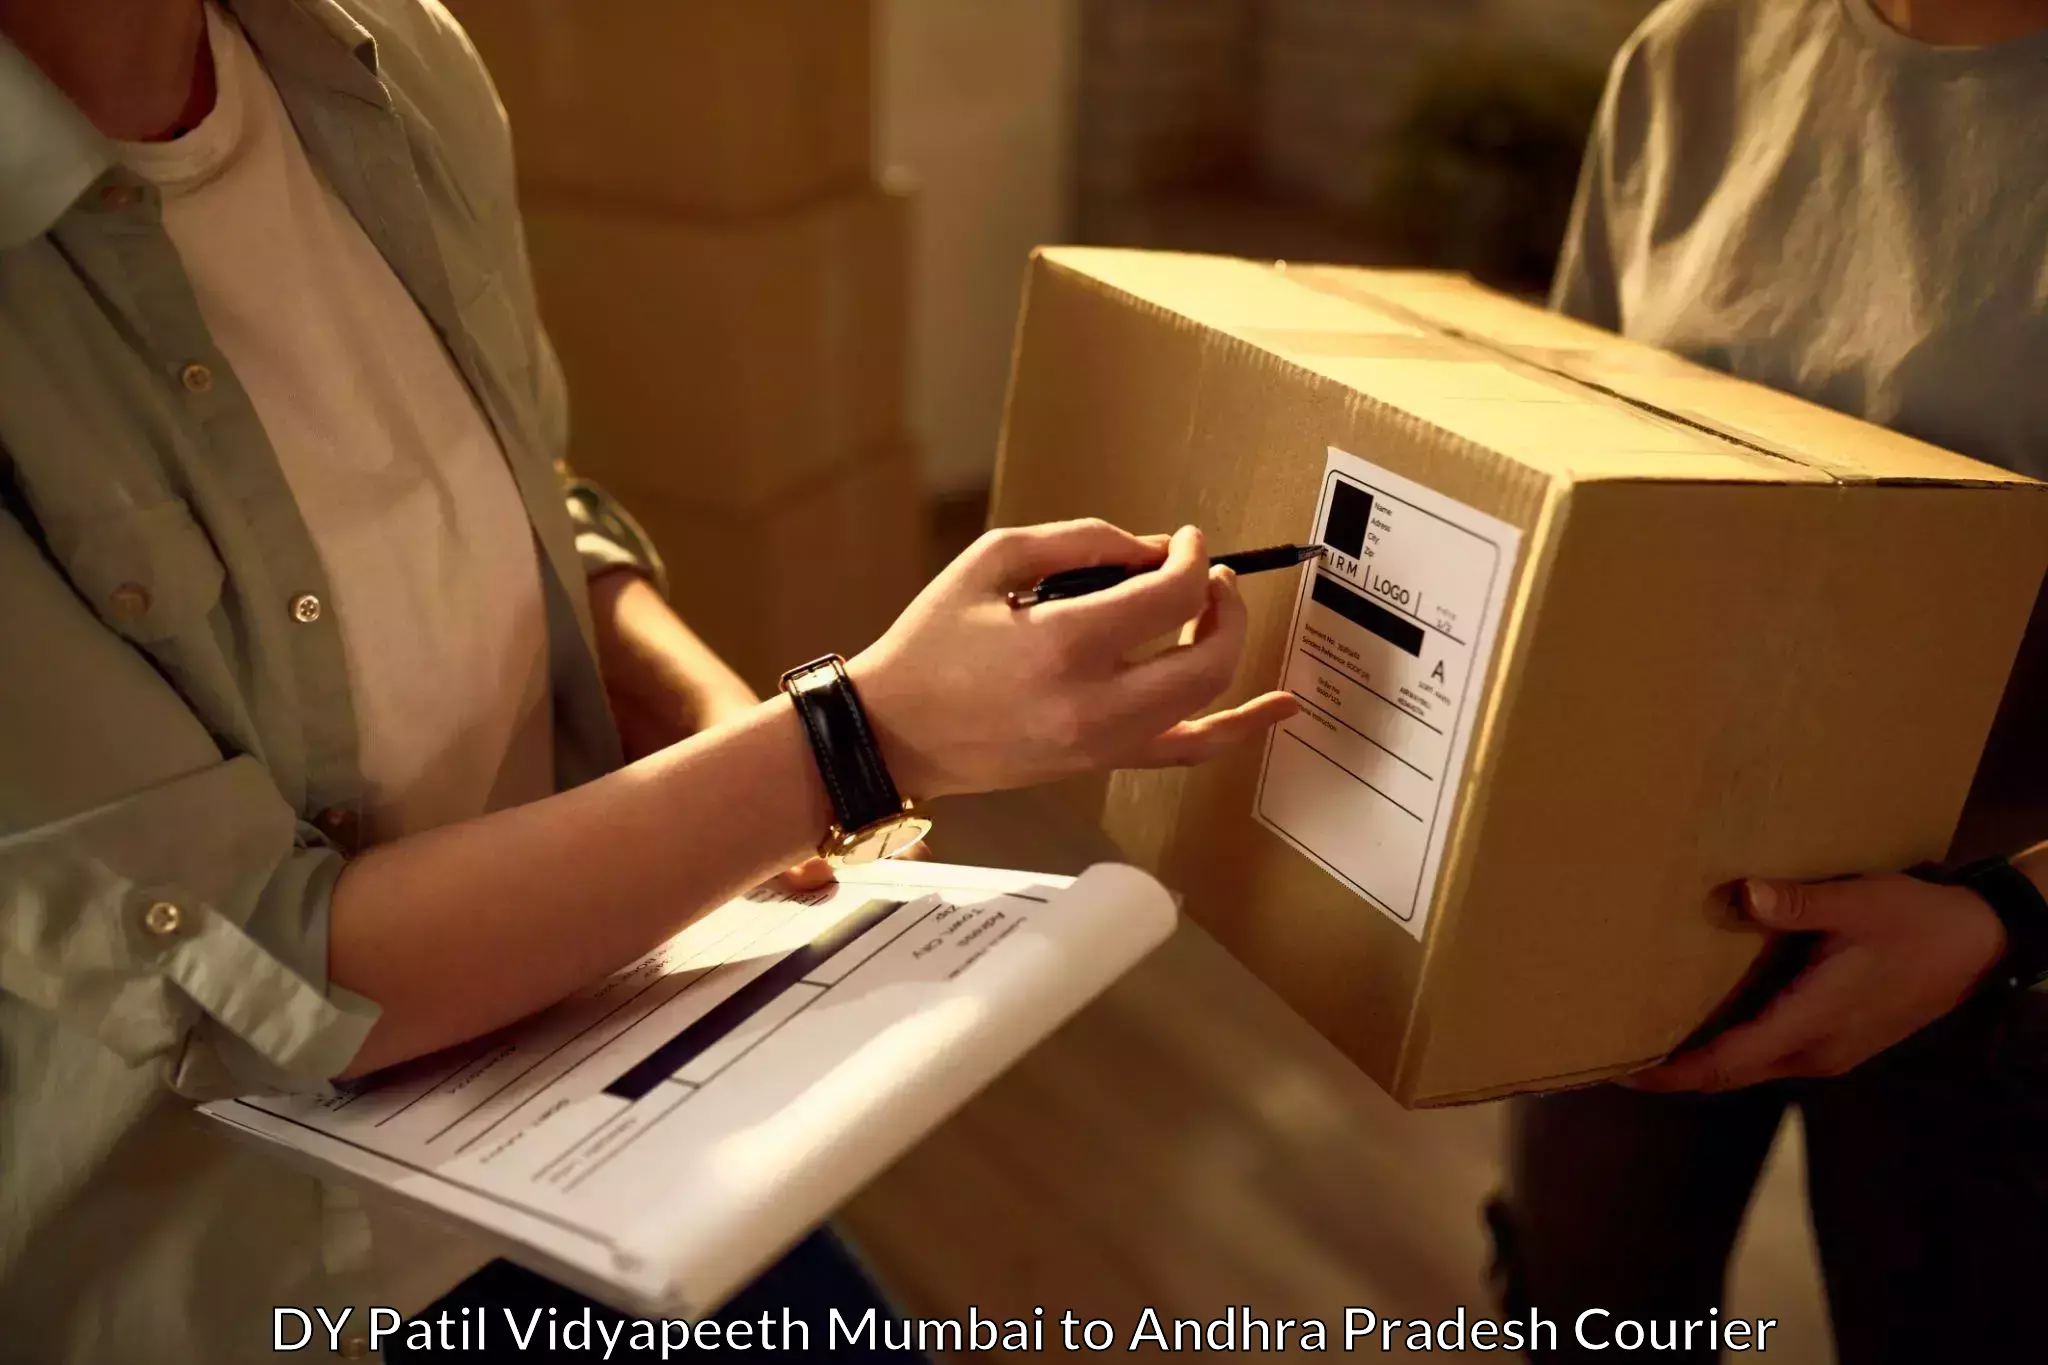 Residential courier service DY Patil Vidyapeeth Mumbai to Orvakal